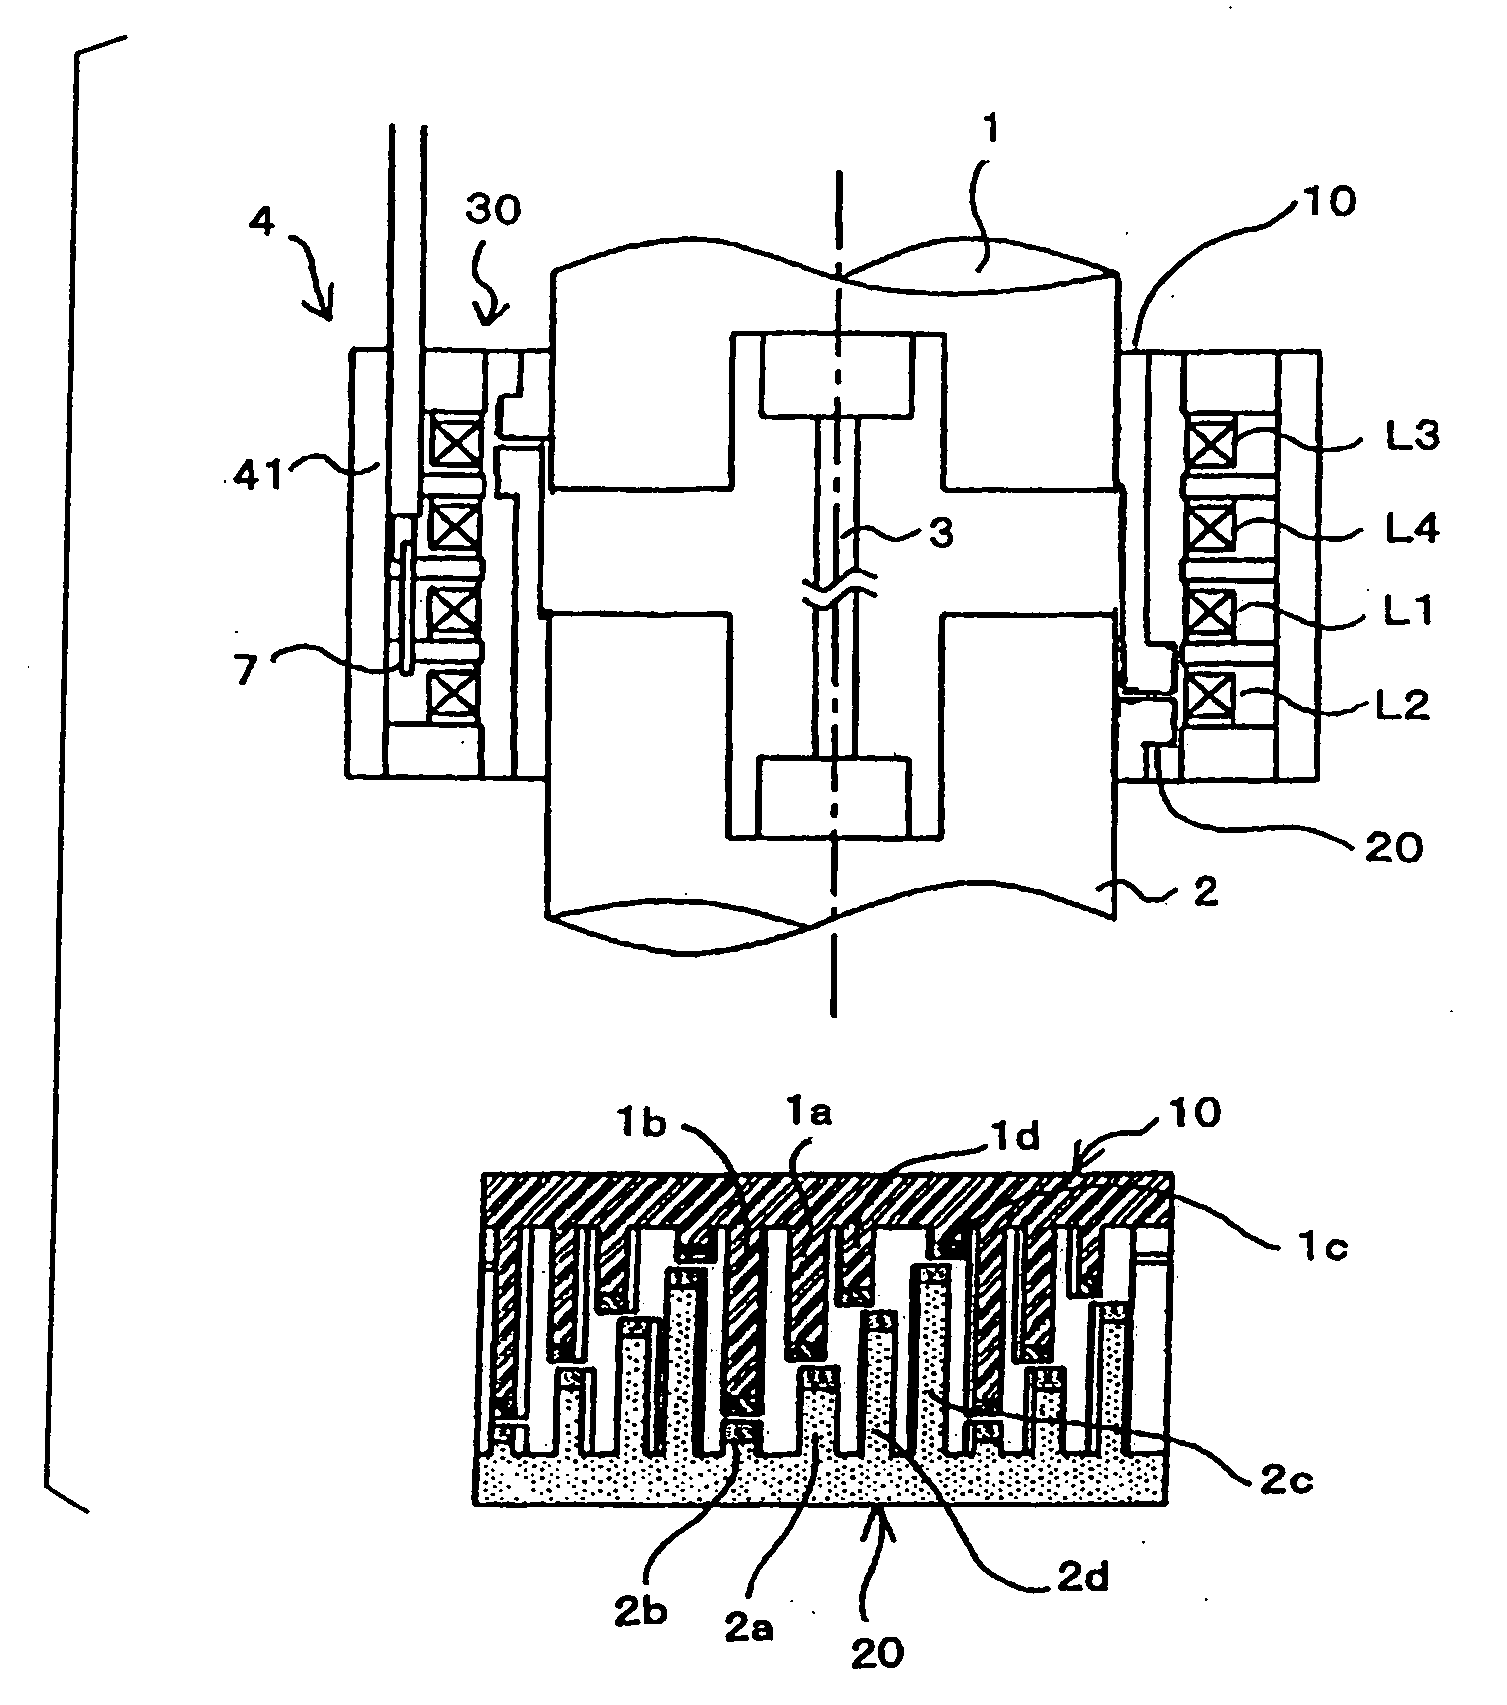 Relative rotational position-detection device